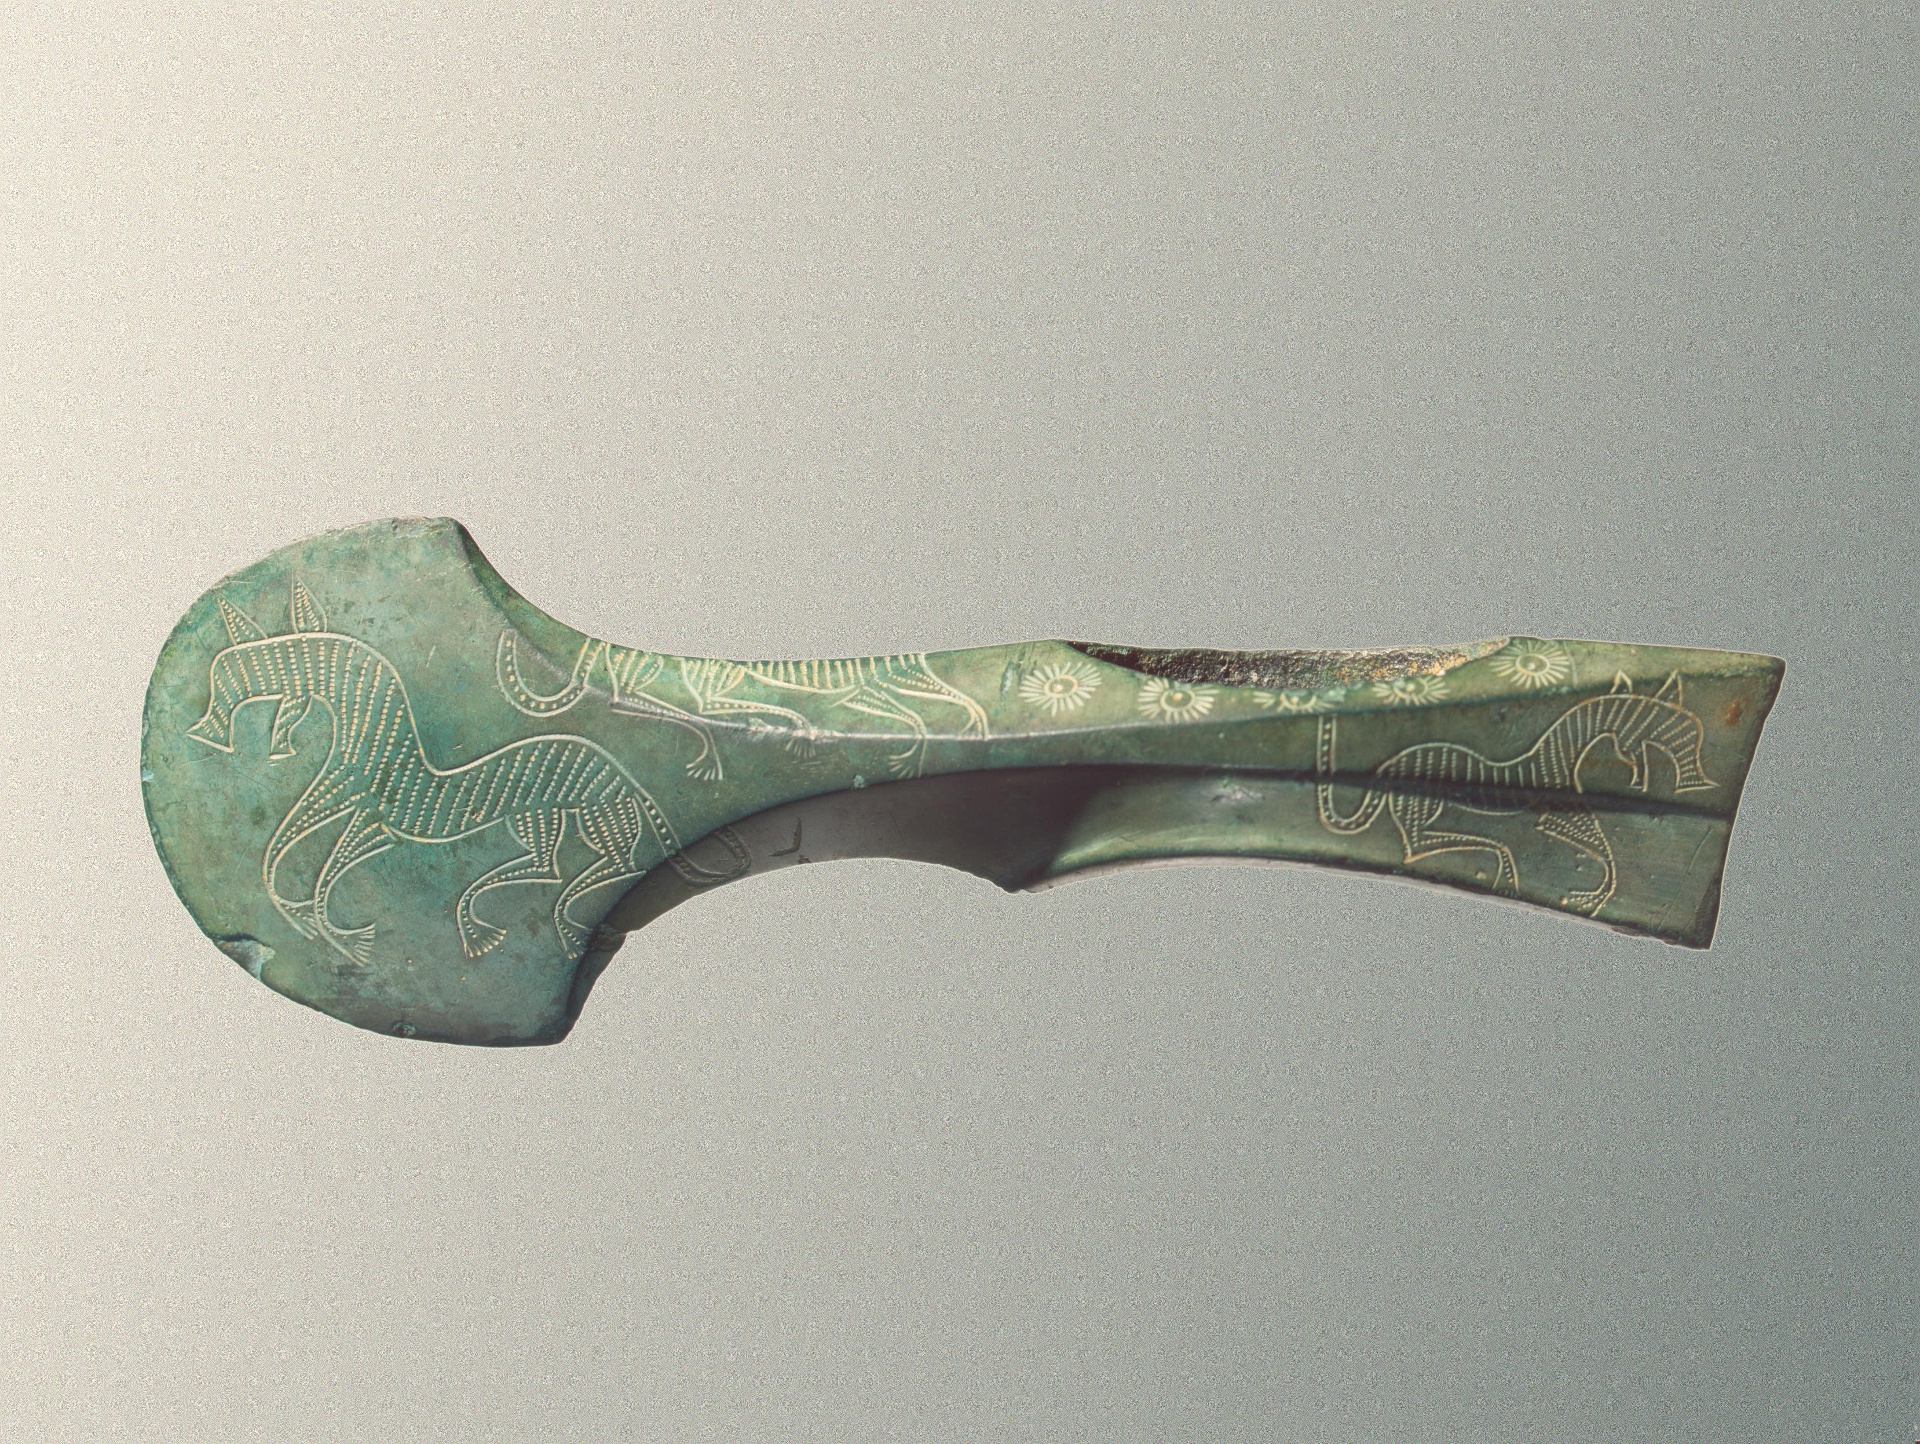 Axe with a Dog and Geometric Pattern